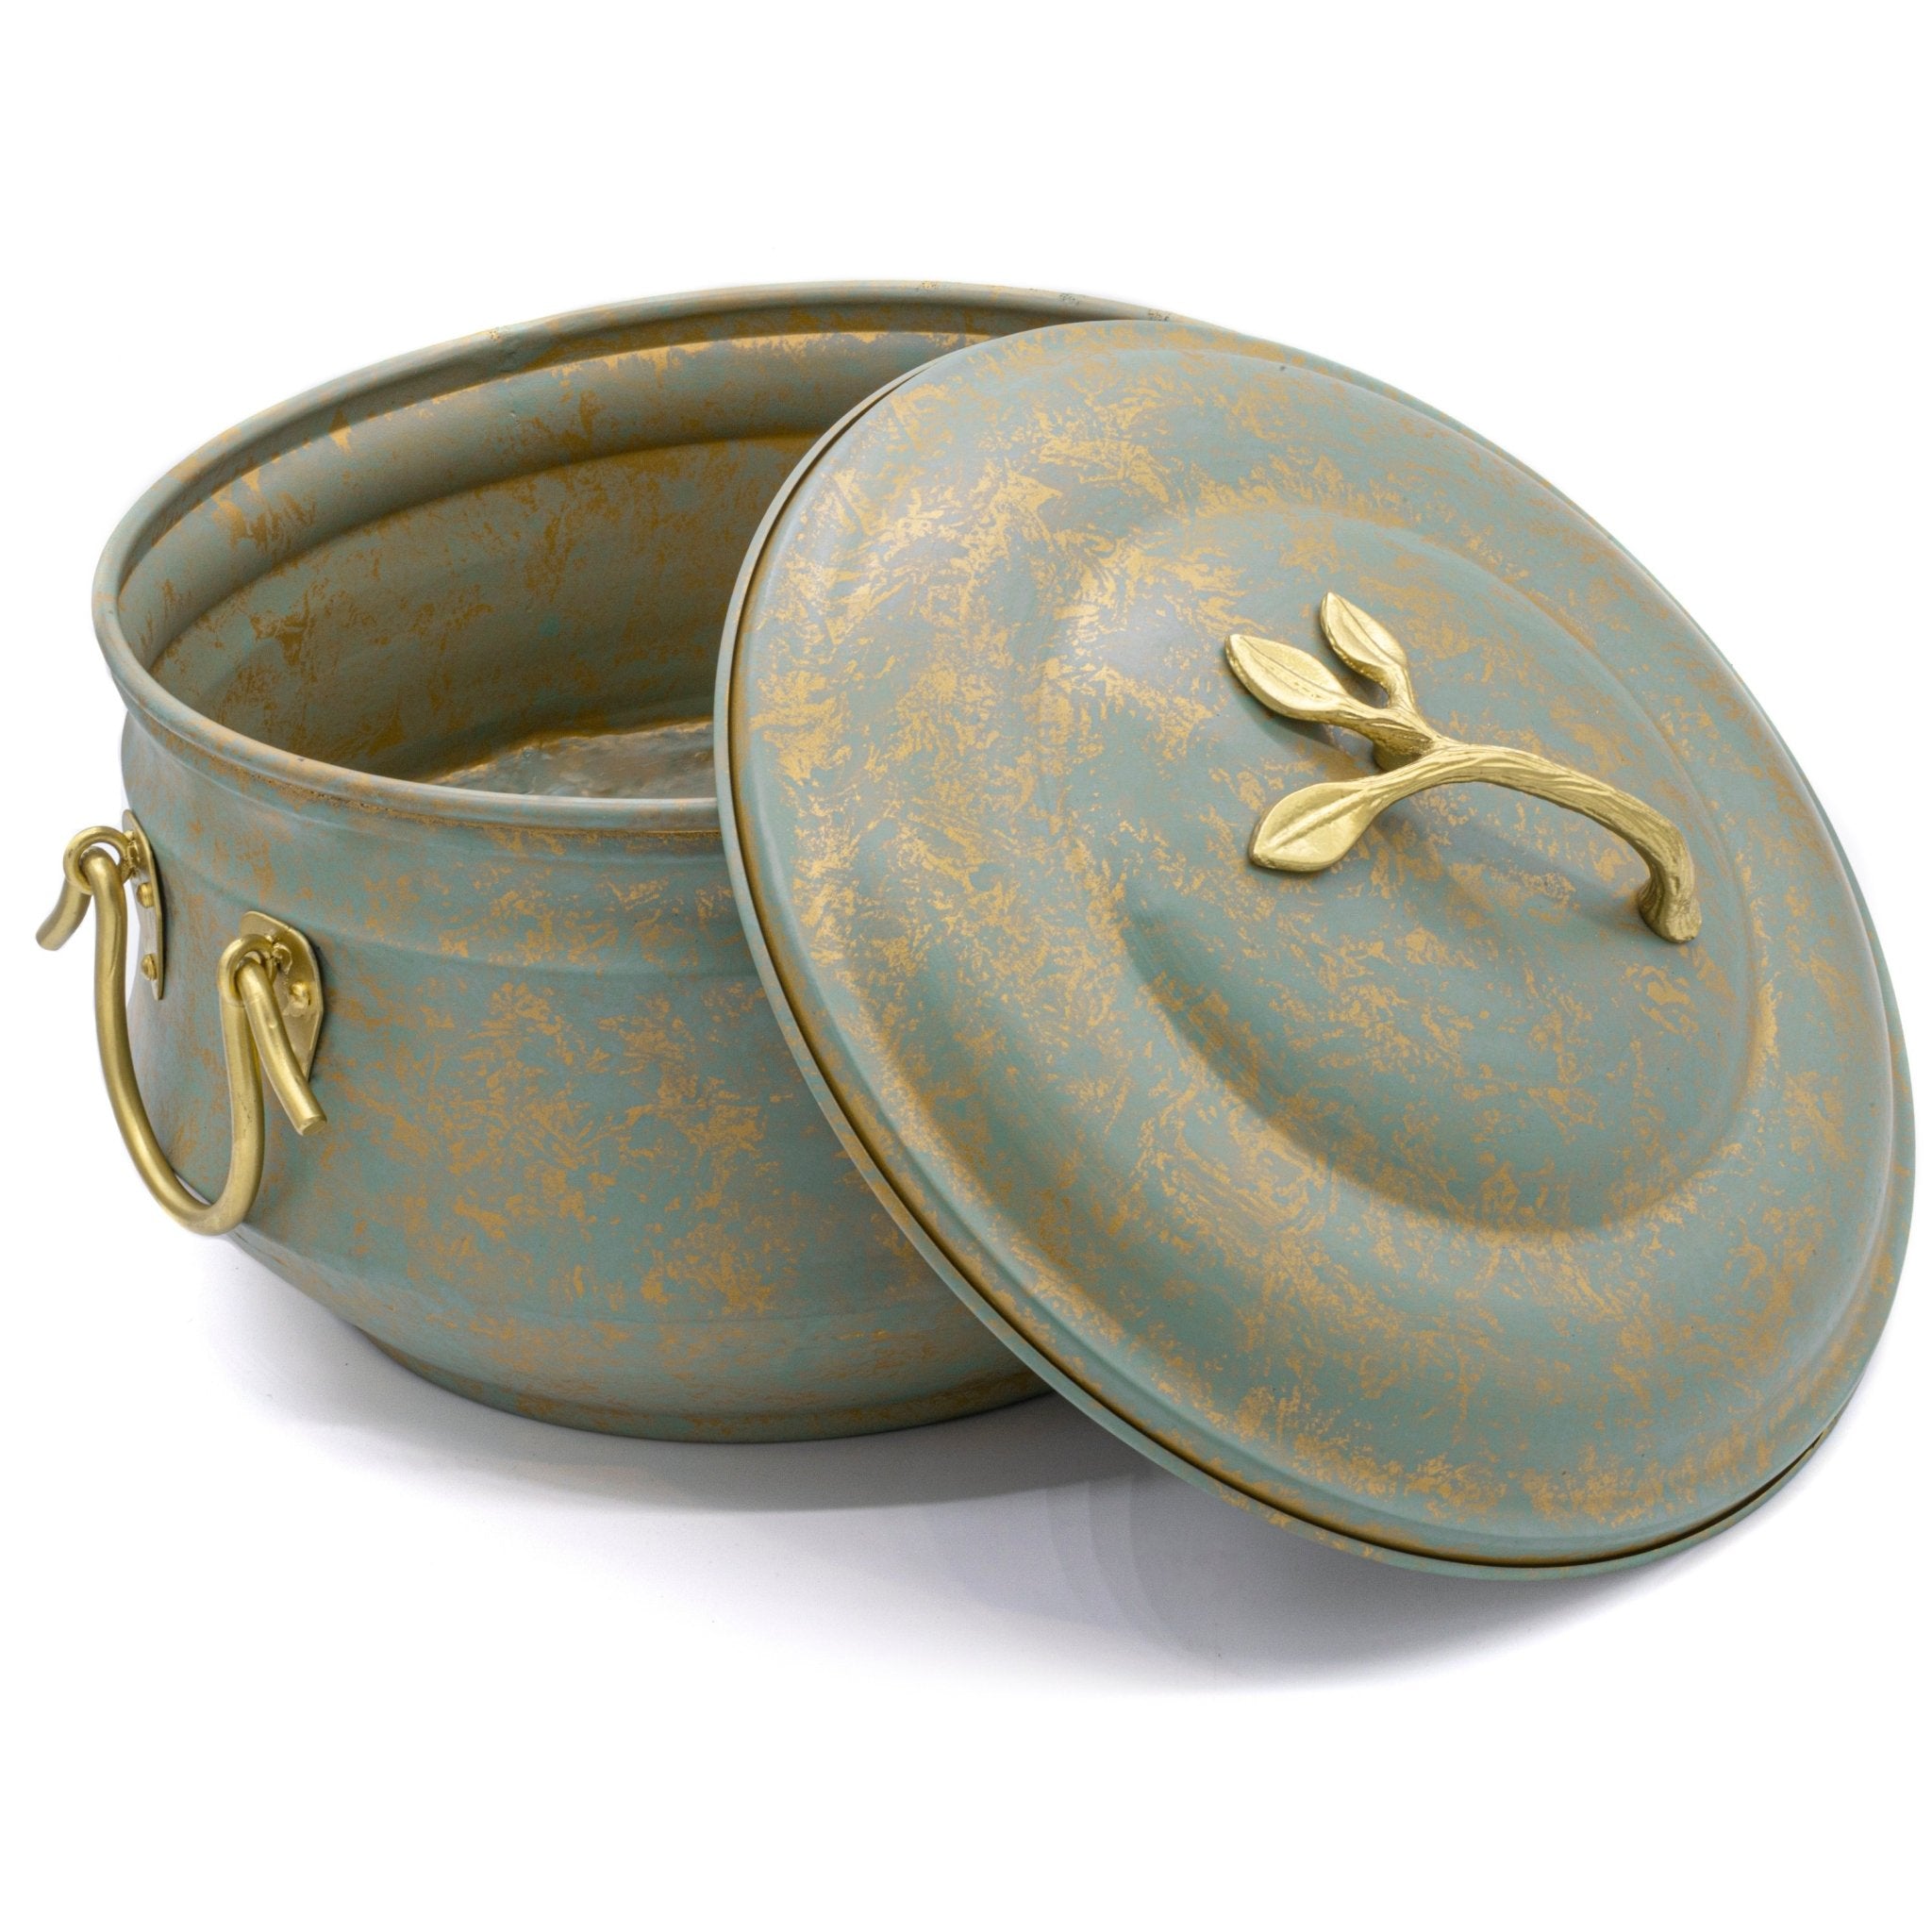 Sedona Hose Pot with Lid, Brass Accents - Good Directions